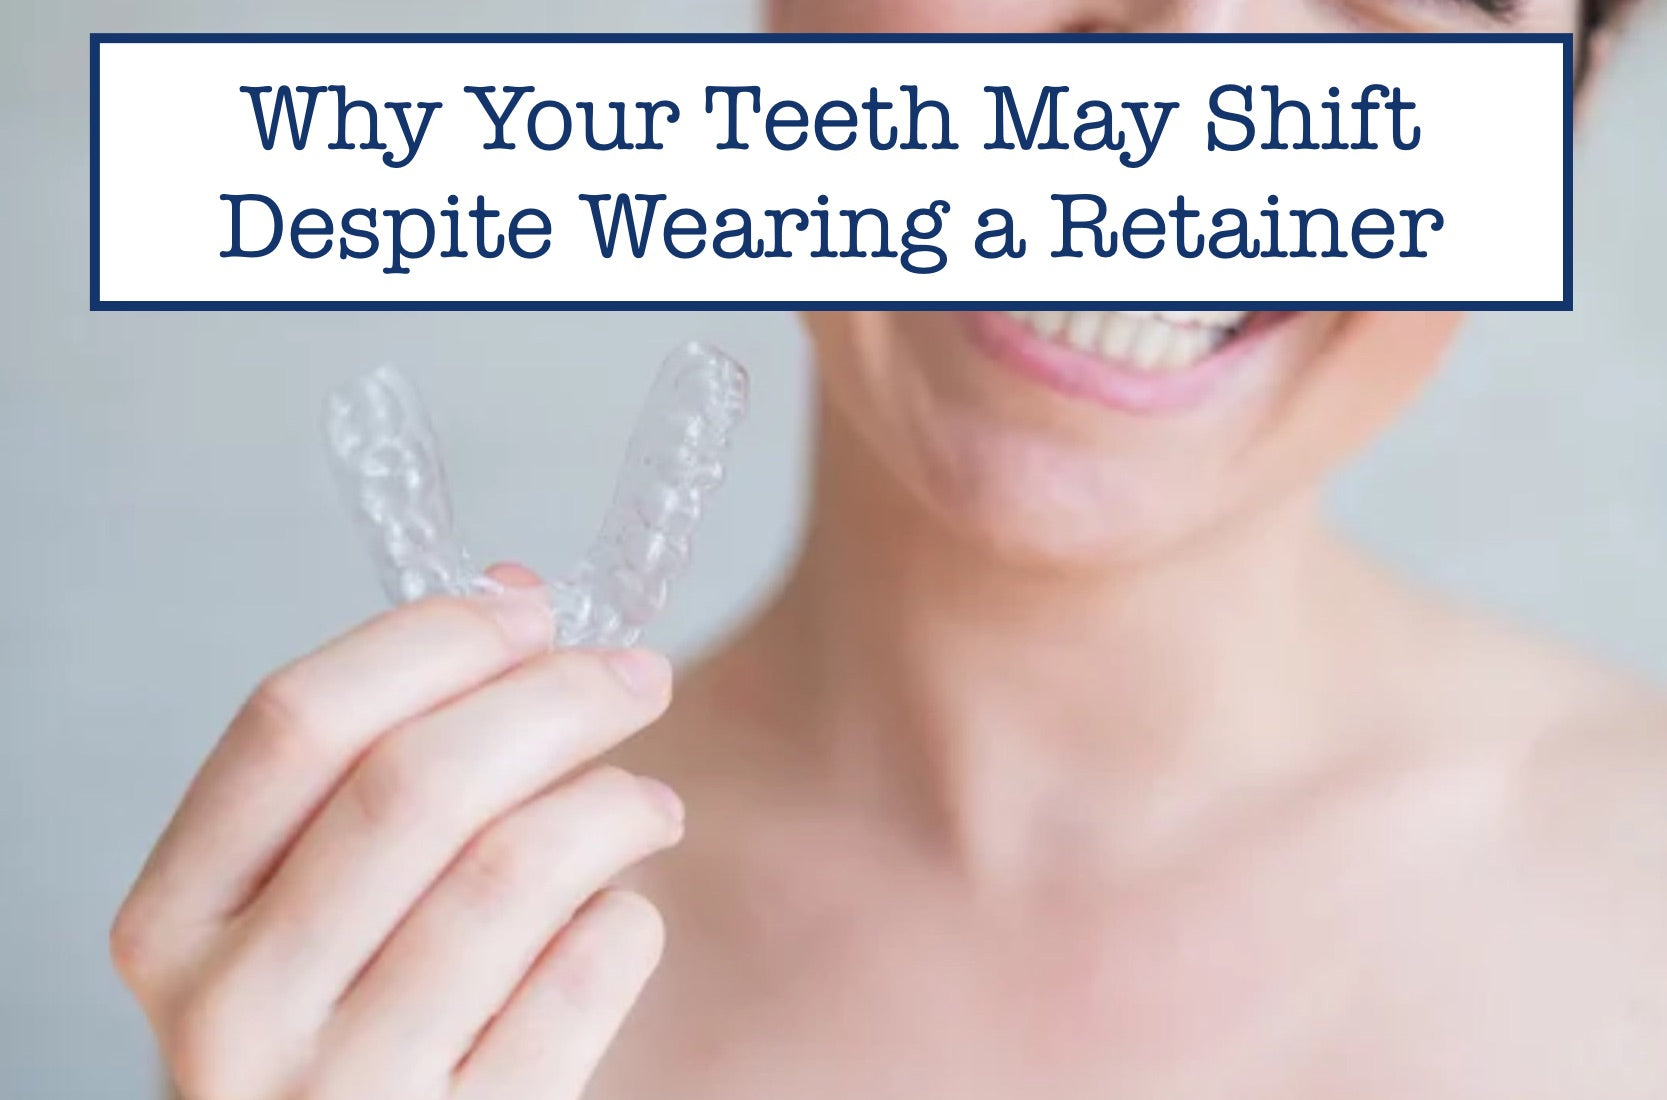 Why Your Teeth May Shift Despite Wearing a Retainer